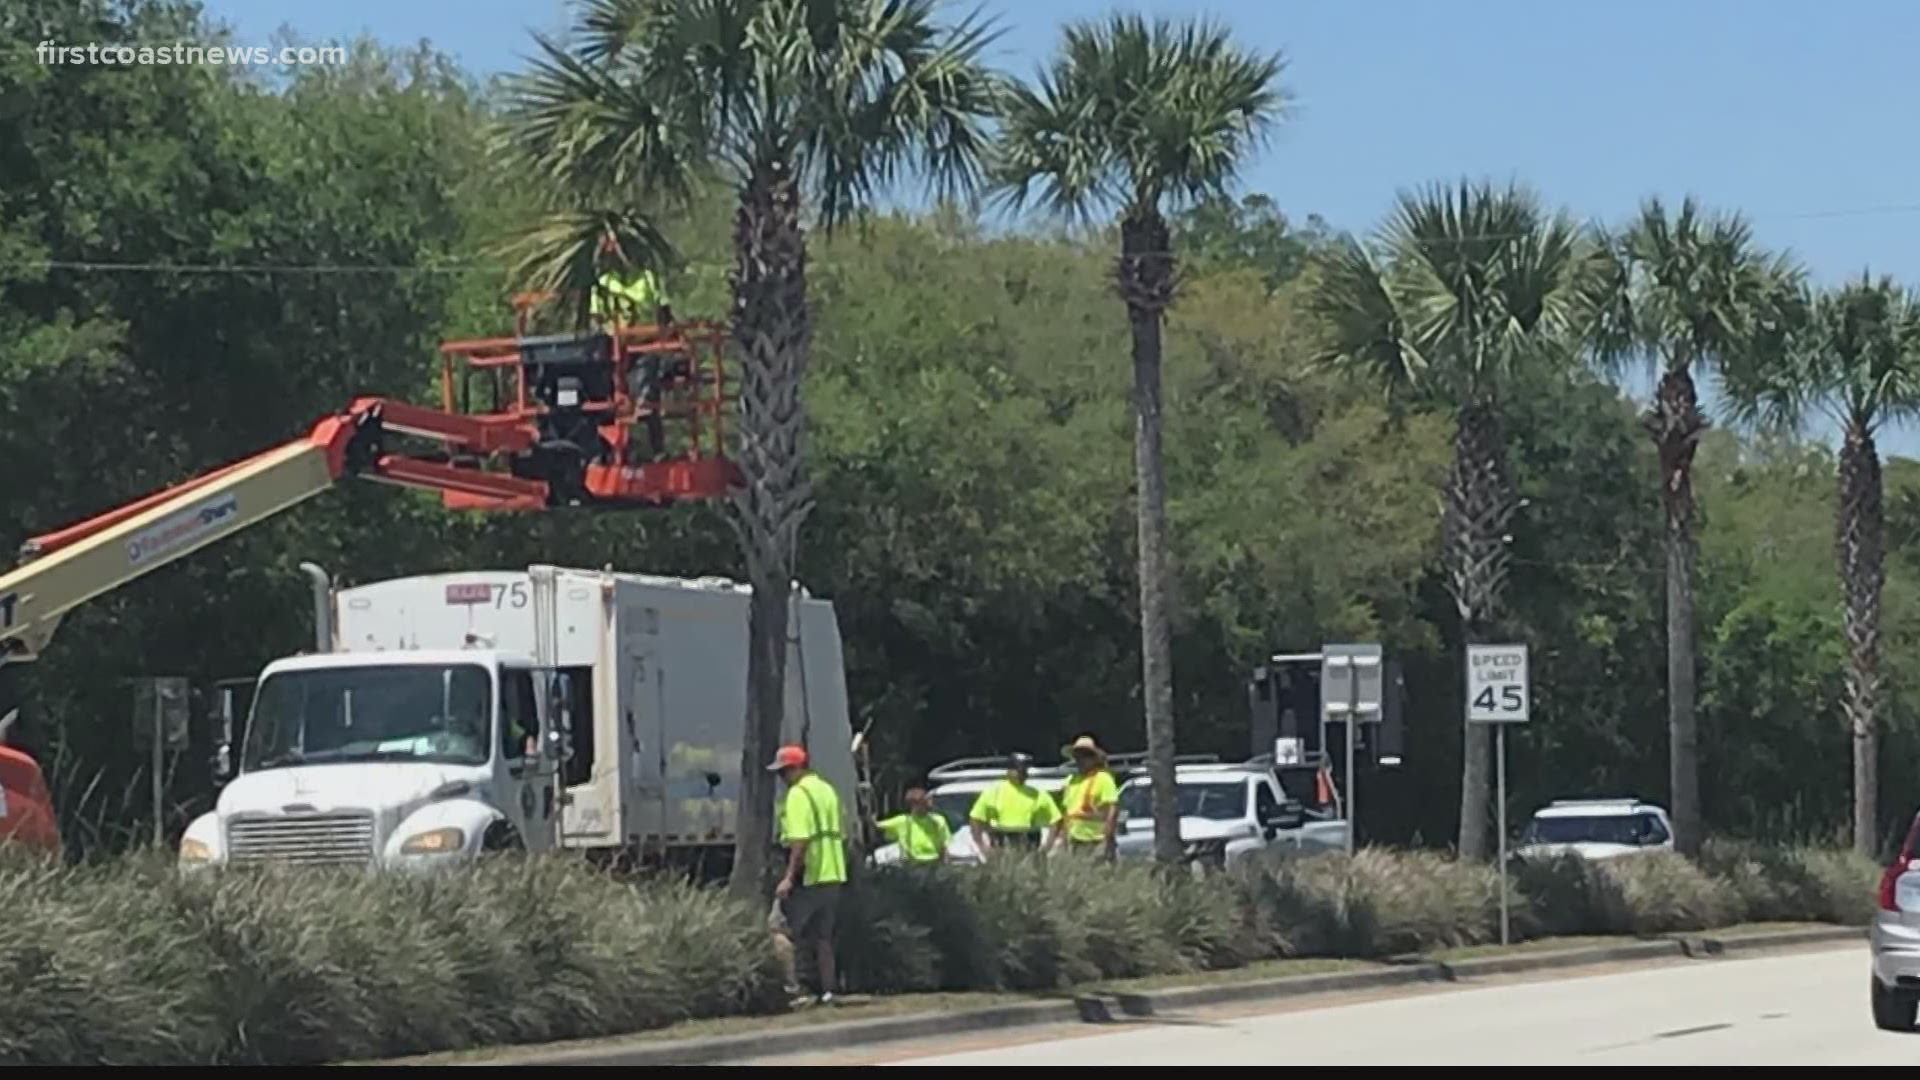 An arborist told First Coast News the trimming was too close and could endanger the trees.